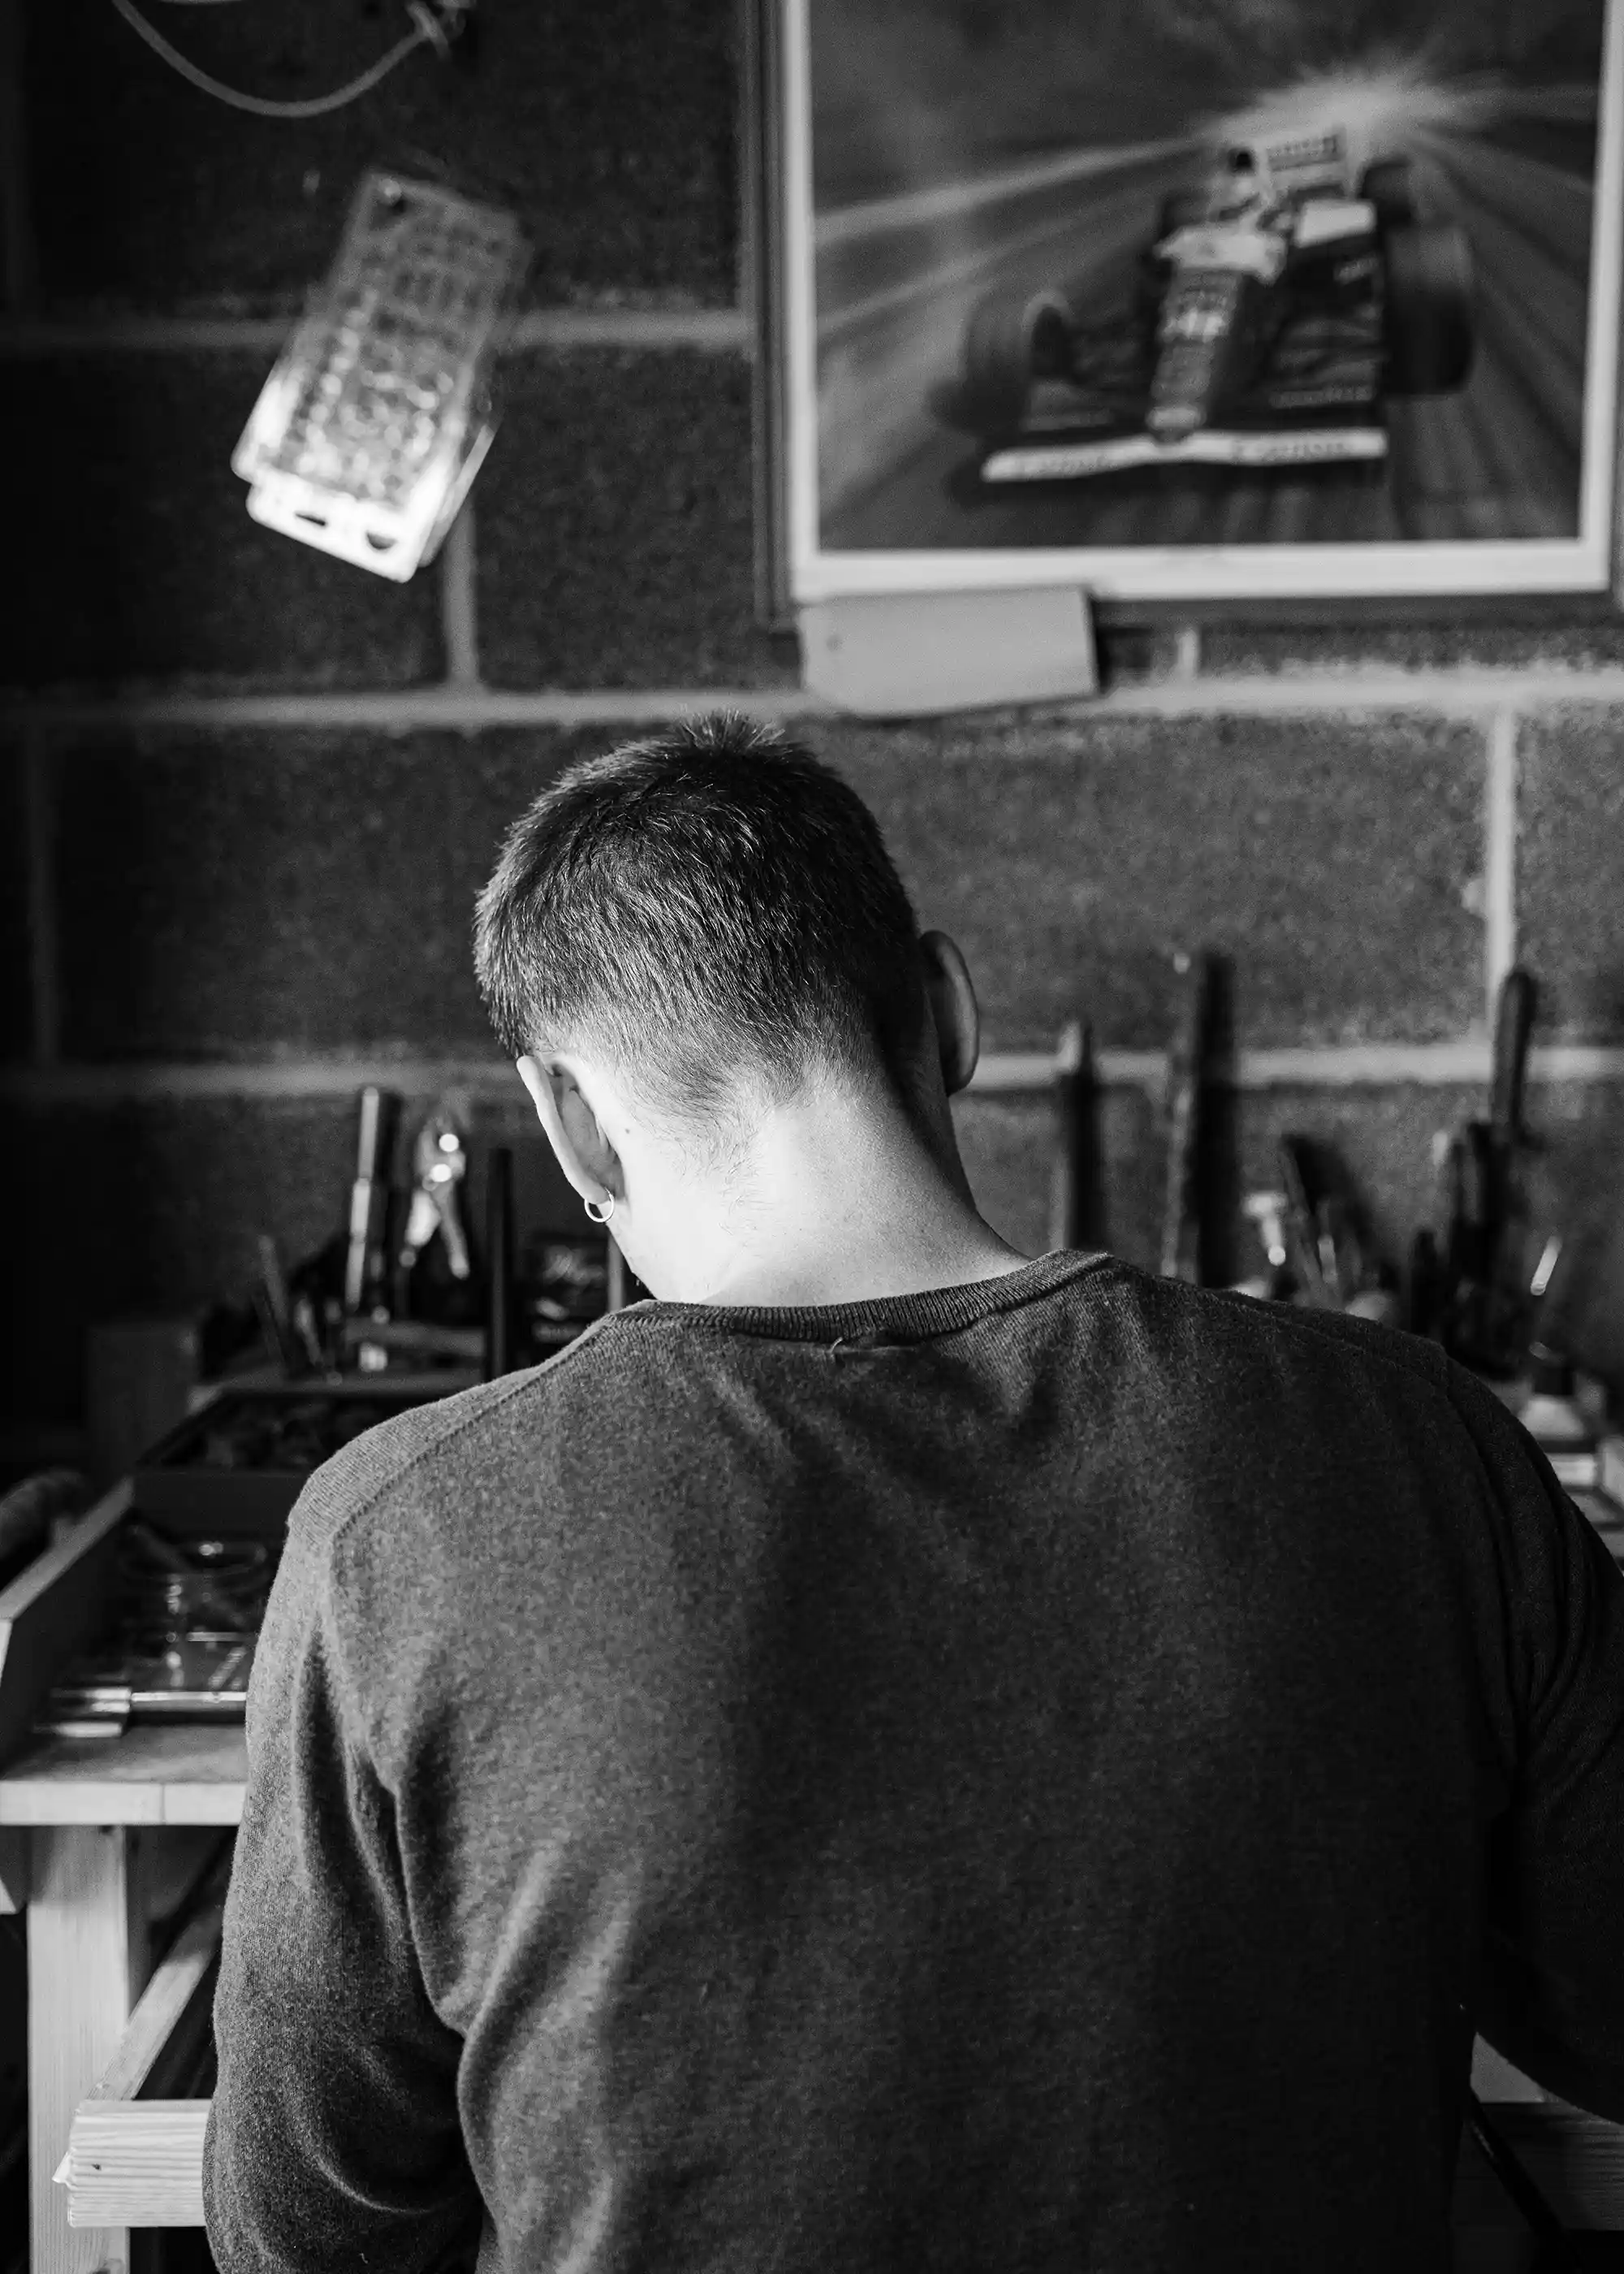 From the back profile photo of Josh at his work bench - Silvawear.